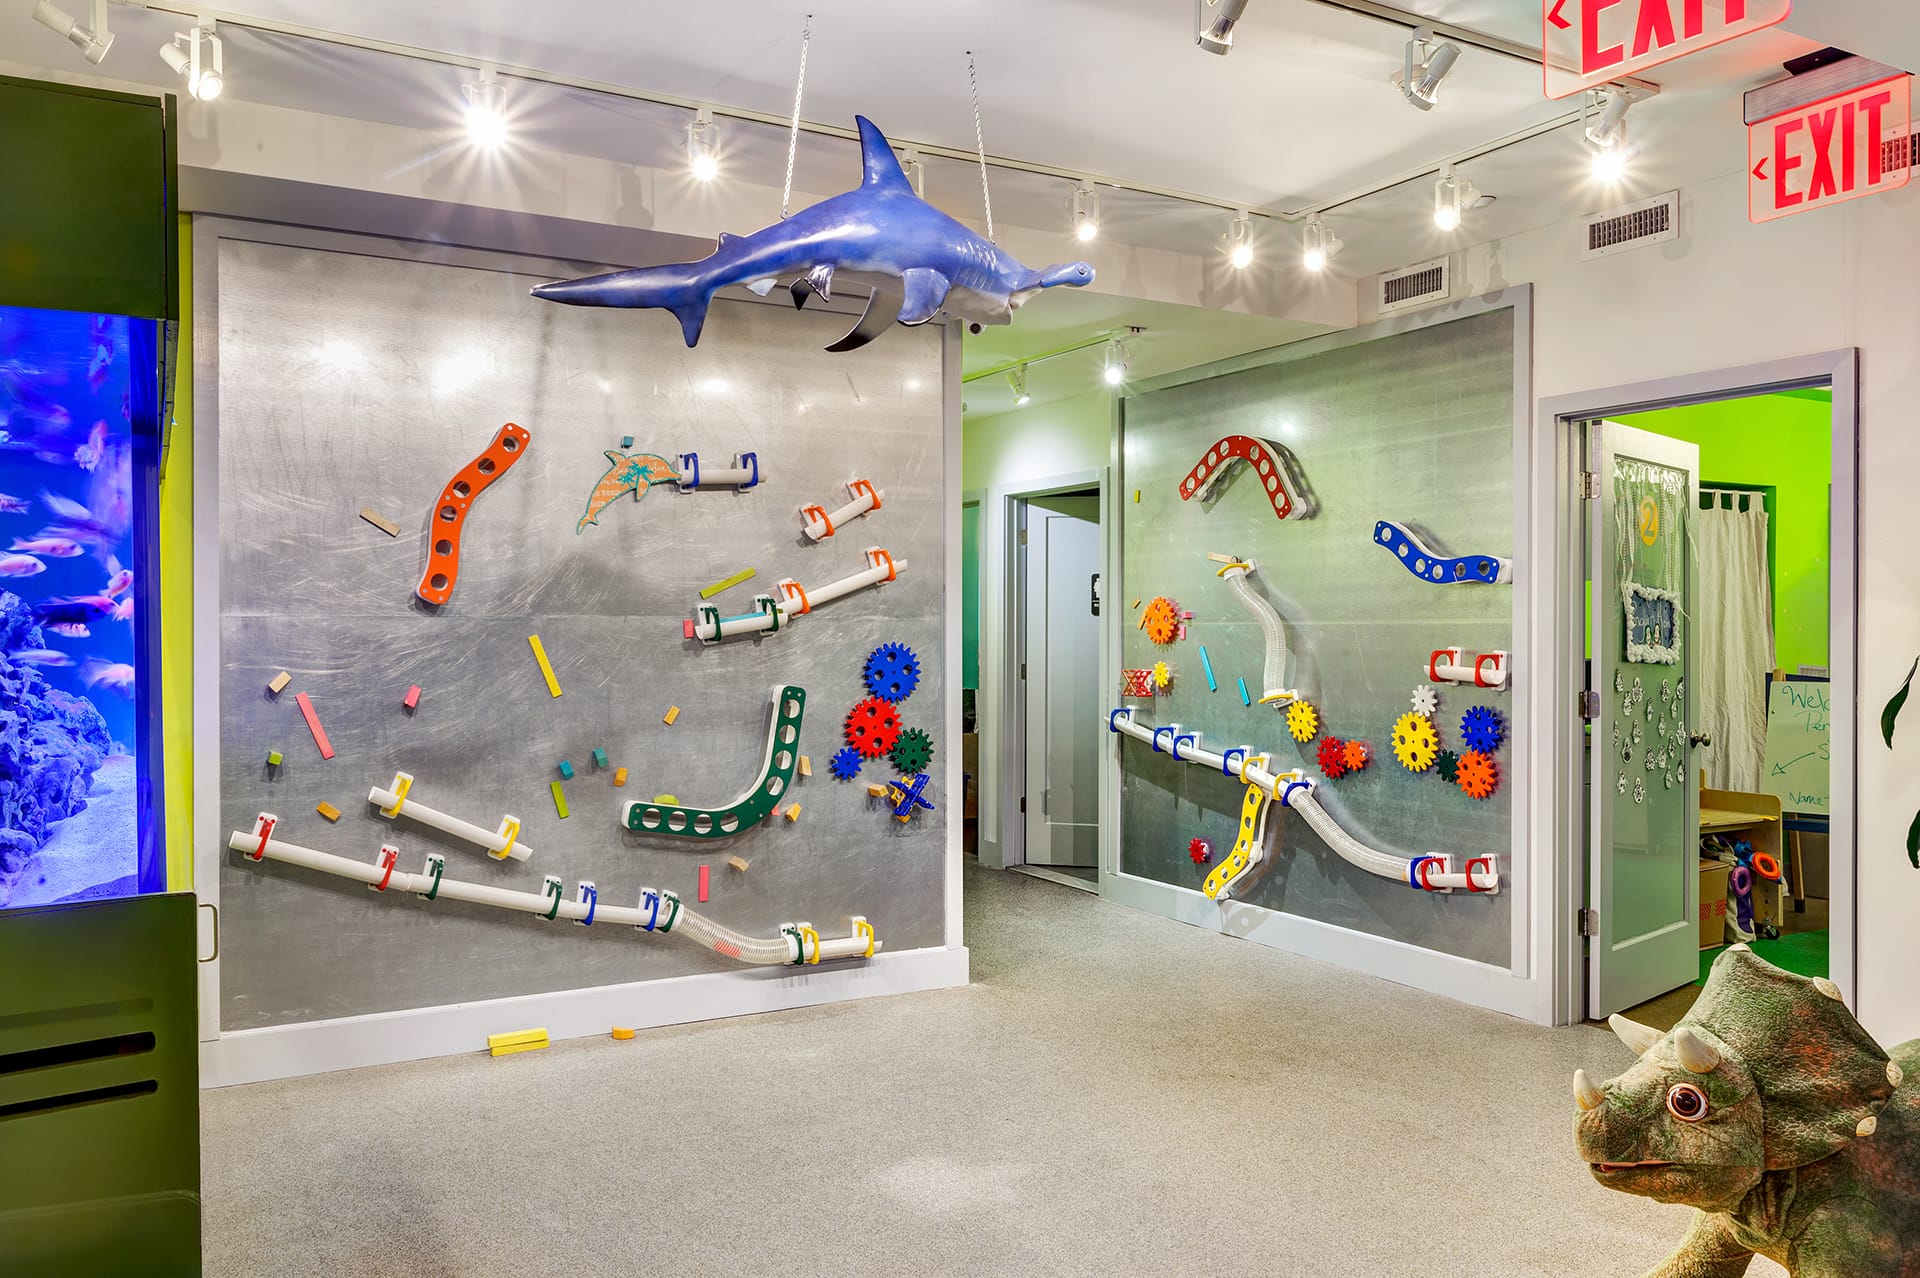 Hallway with magnetic walls, a hammerhead shark model hanging from the ceiling, and a dinosaur model.